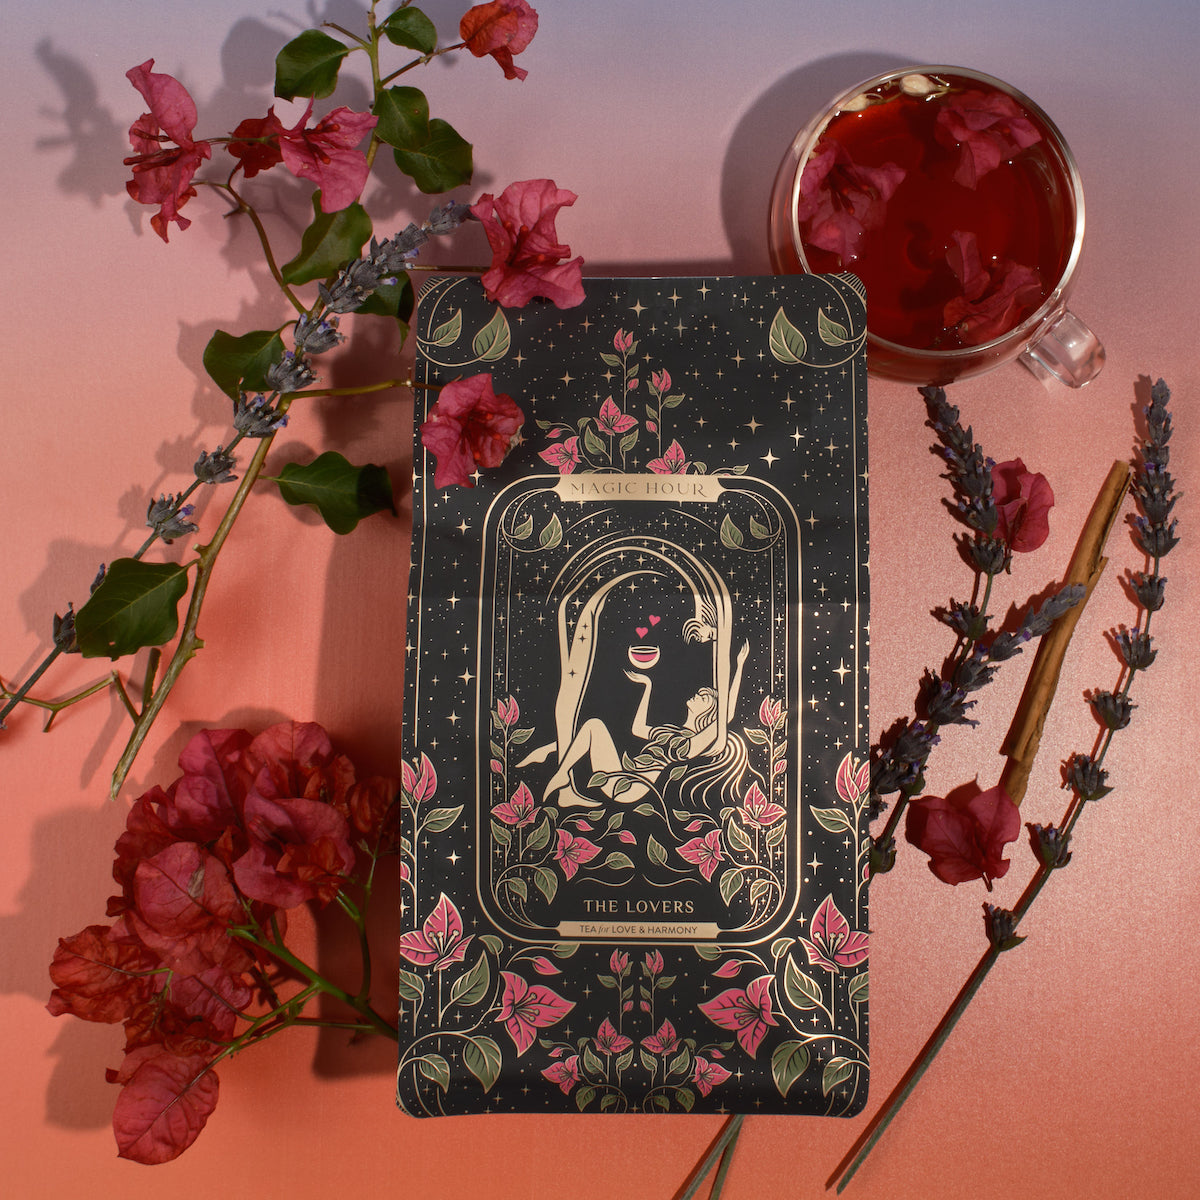 A tarot card titled &quot;The Lovers&quot; is surrounded by decorative flowers, lavender sprigs, and cinnamon sticks on a gradient background. The card features an illustration of two figures intertwined under a crescent moon and stars, with a chalice above them. A cup of Magic Hour&#39;s The Lovers tea infused with Organic Hibiscus sits nearby.